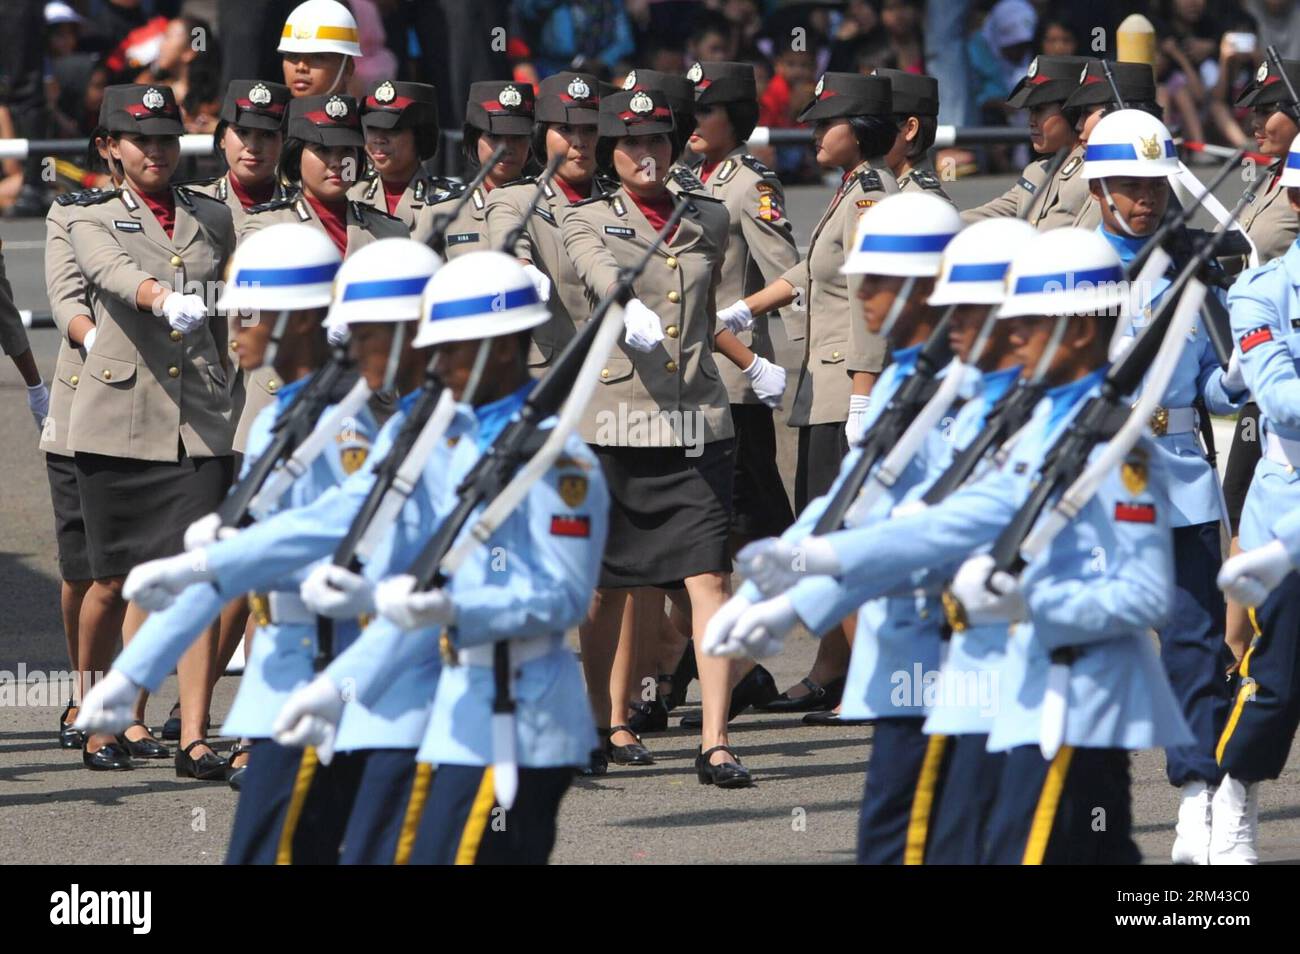 Bildnummer: 60365176  Datum: 17.08.2013  Copyright: imago/Xinhua JAKARTA,  (Xinhua) -- Members of Indonesian police women parade during a celebration of the country s 68th independence anniversary at the Presidential Palace in Jakarta, Indonesia, . (Xinhua/Agung Kuncahya B.) INDONESIA-JAKARTA-68TH INDEPENDENCE DAY PUBLICATIONxNOTxINxCHN Politik Gesellschaft Feiertag Unabhaengigkeit Parade premiumd x0x xrj 2013 quer     60365176 Date 17 08 2013 Copyright Imago XINHUA Jakarta XINHUA Members of Indonesian Police Women Parade during a Celebration of The Country S 68th Independence Anniversary AT T Stock Photo